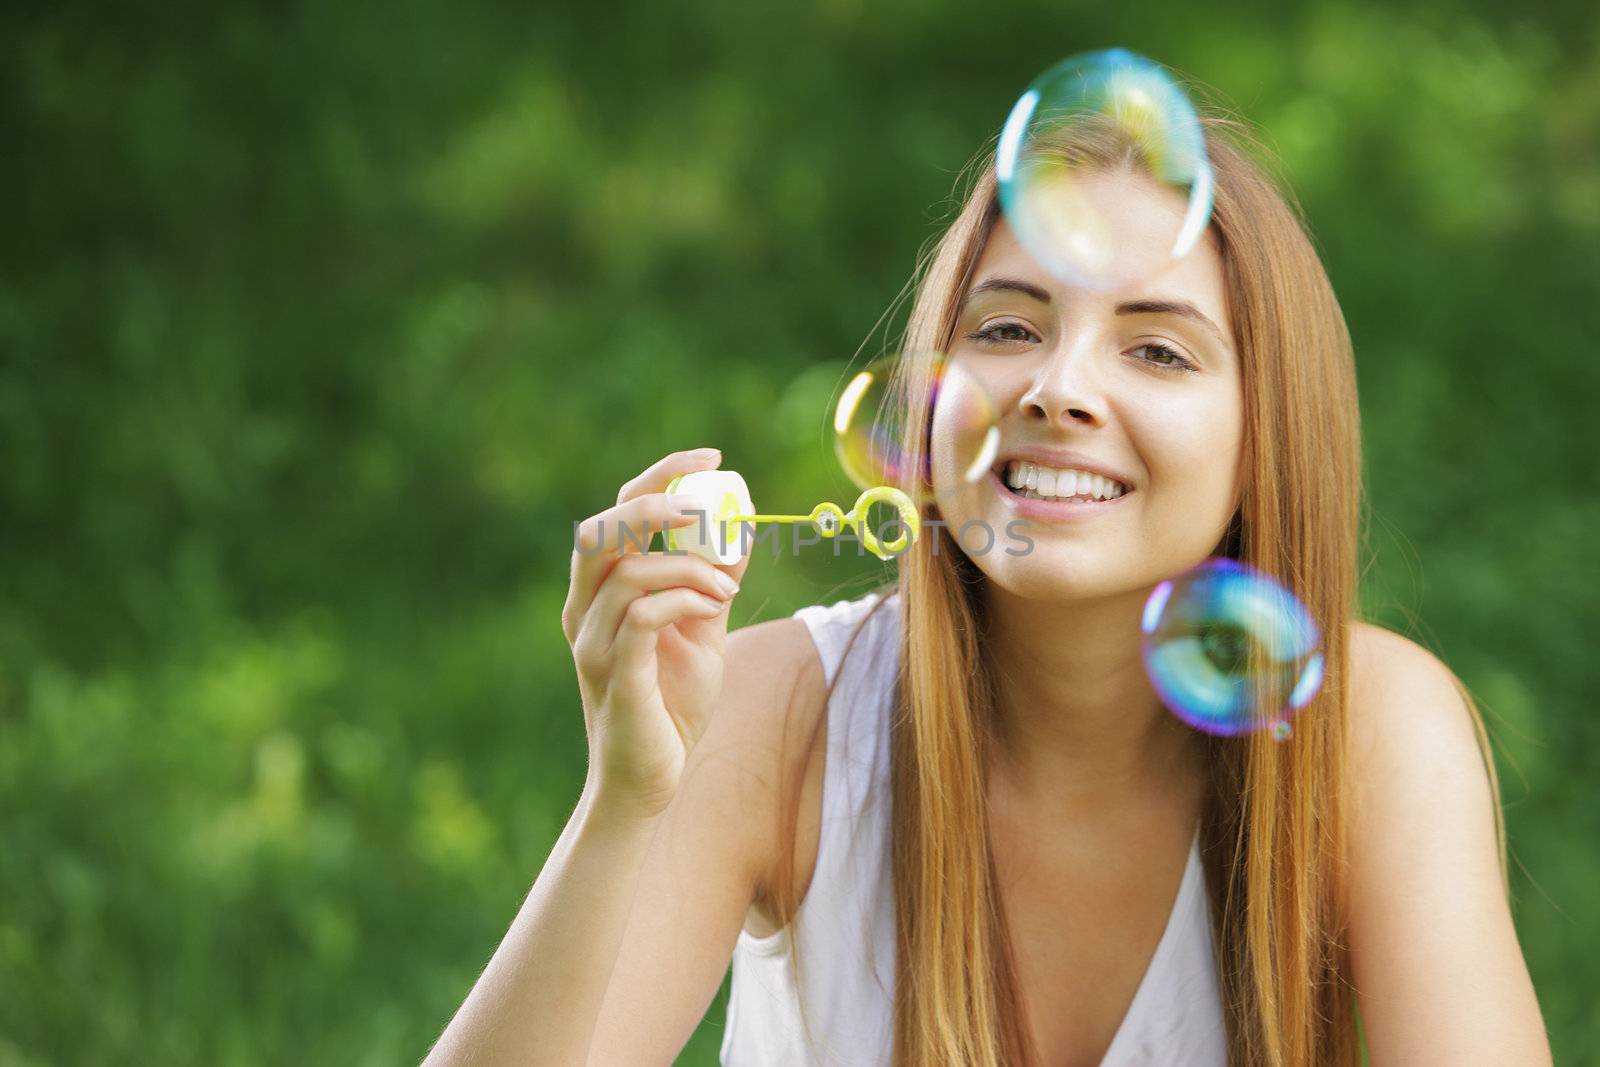 Beautiful young woman smiling and blowing bubbles outdoor in the nature.